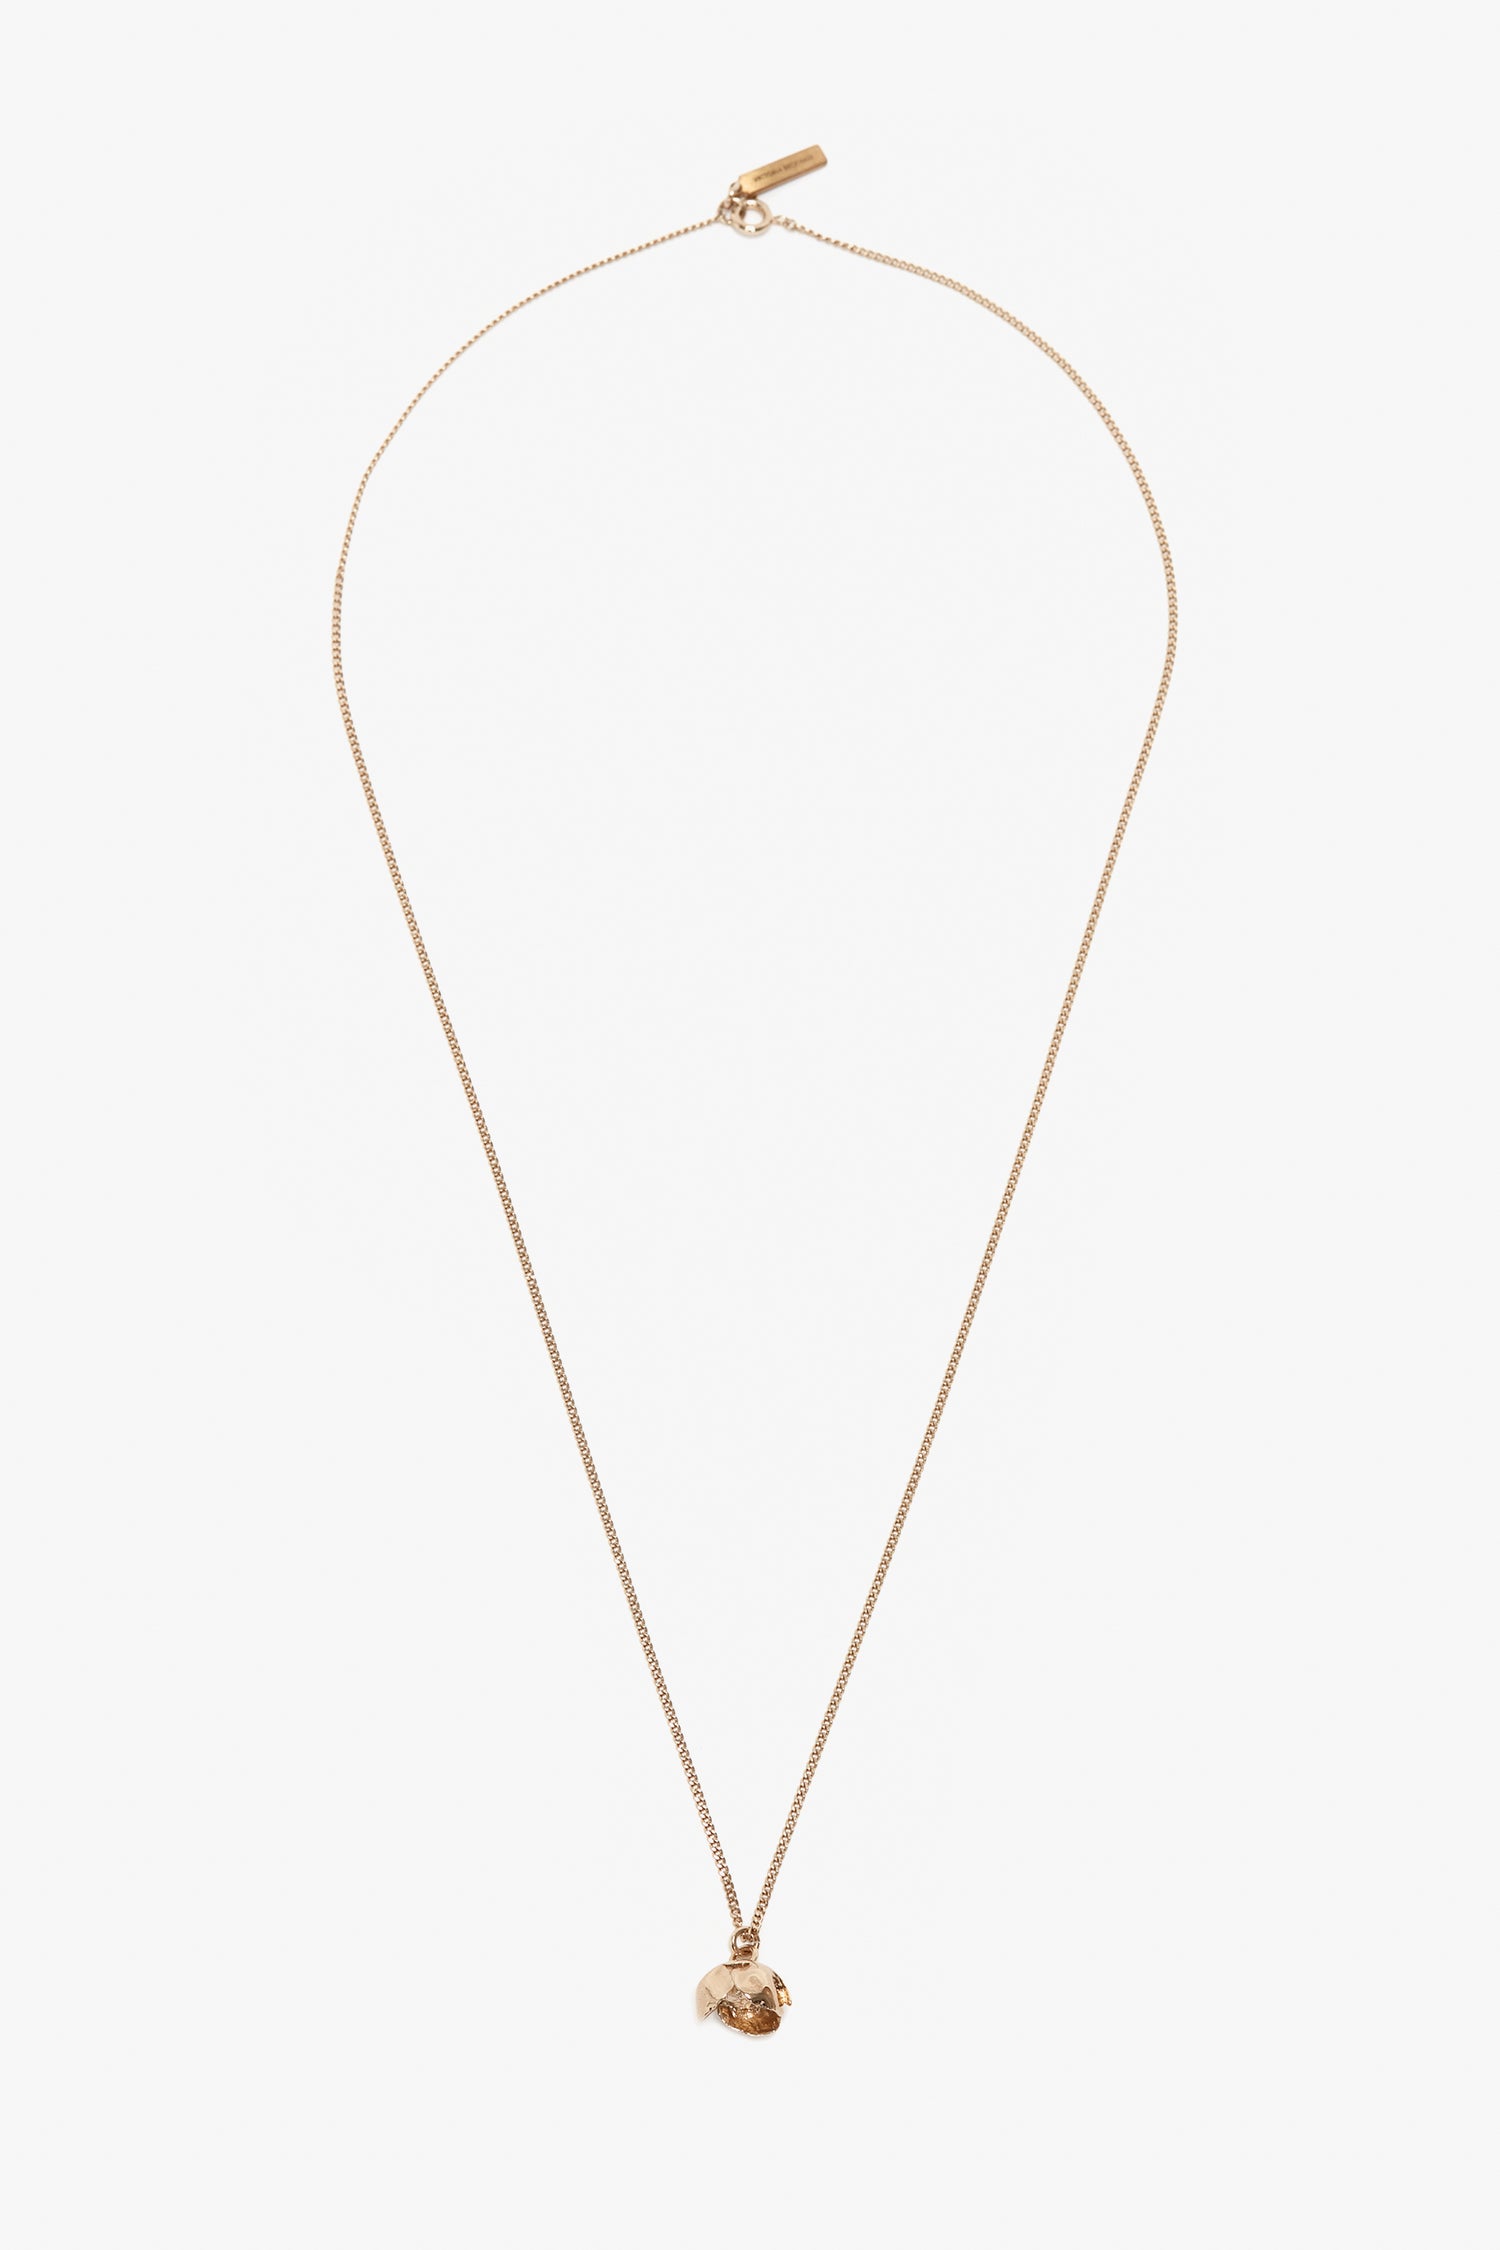 A gold chain necklace featuring a small, intricately detailed Camellia Flower pendant, handcrafted in Italy and displayed against a plain white background is replaced with the Exclusive Camellia Flower Necklace In Gold by Victoria Beckham.